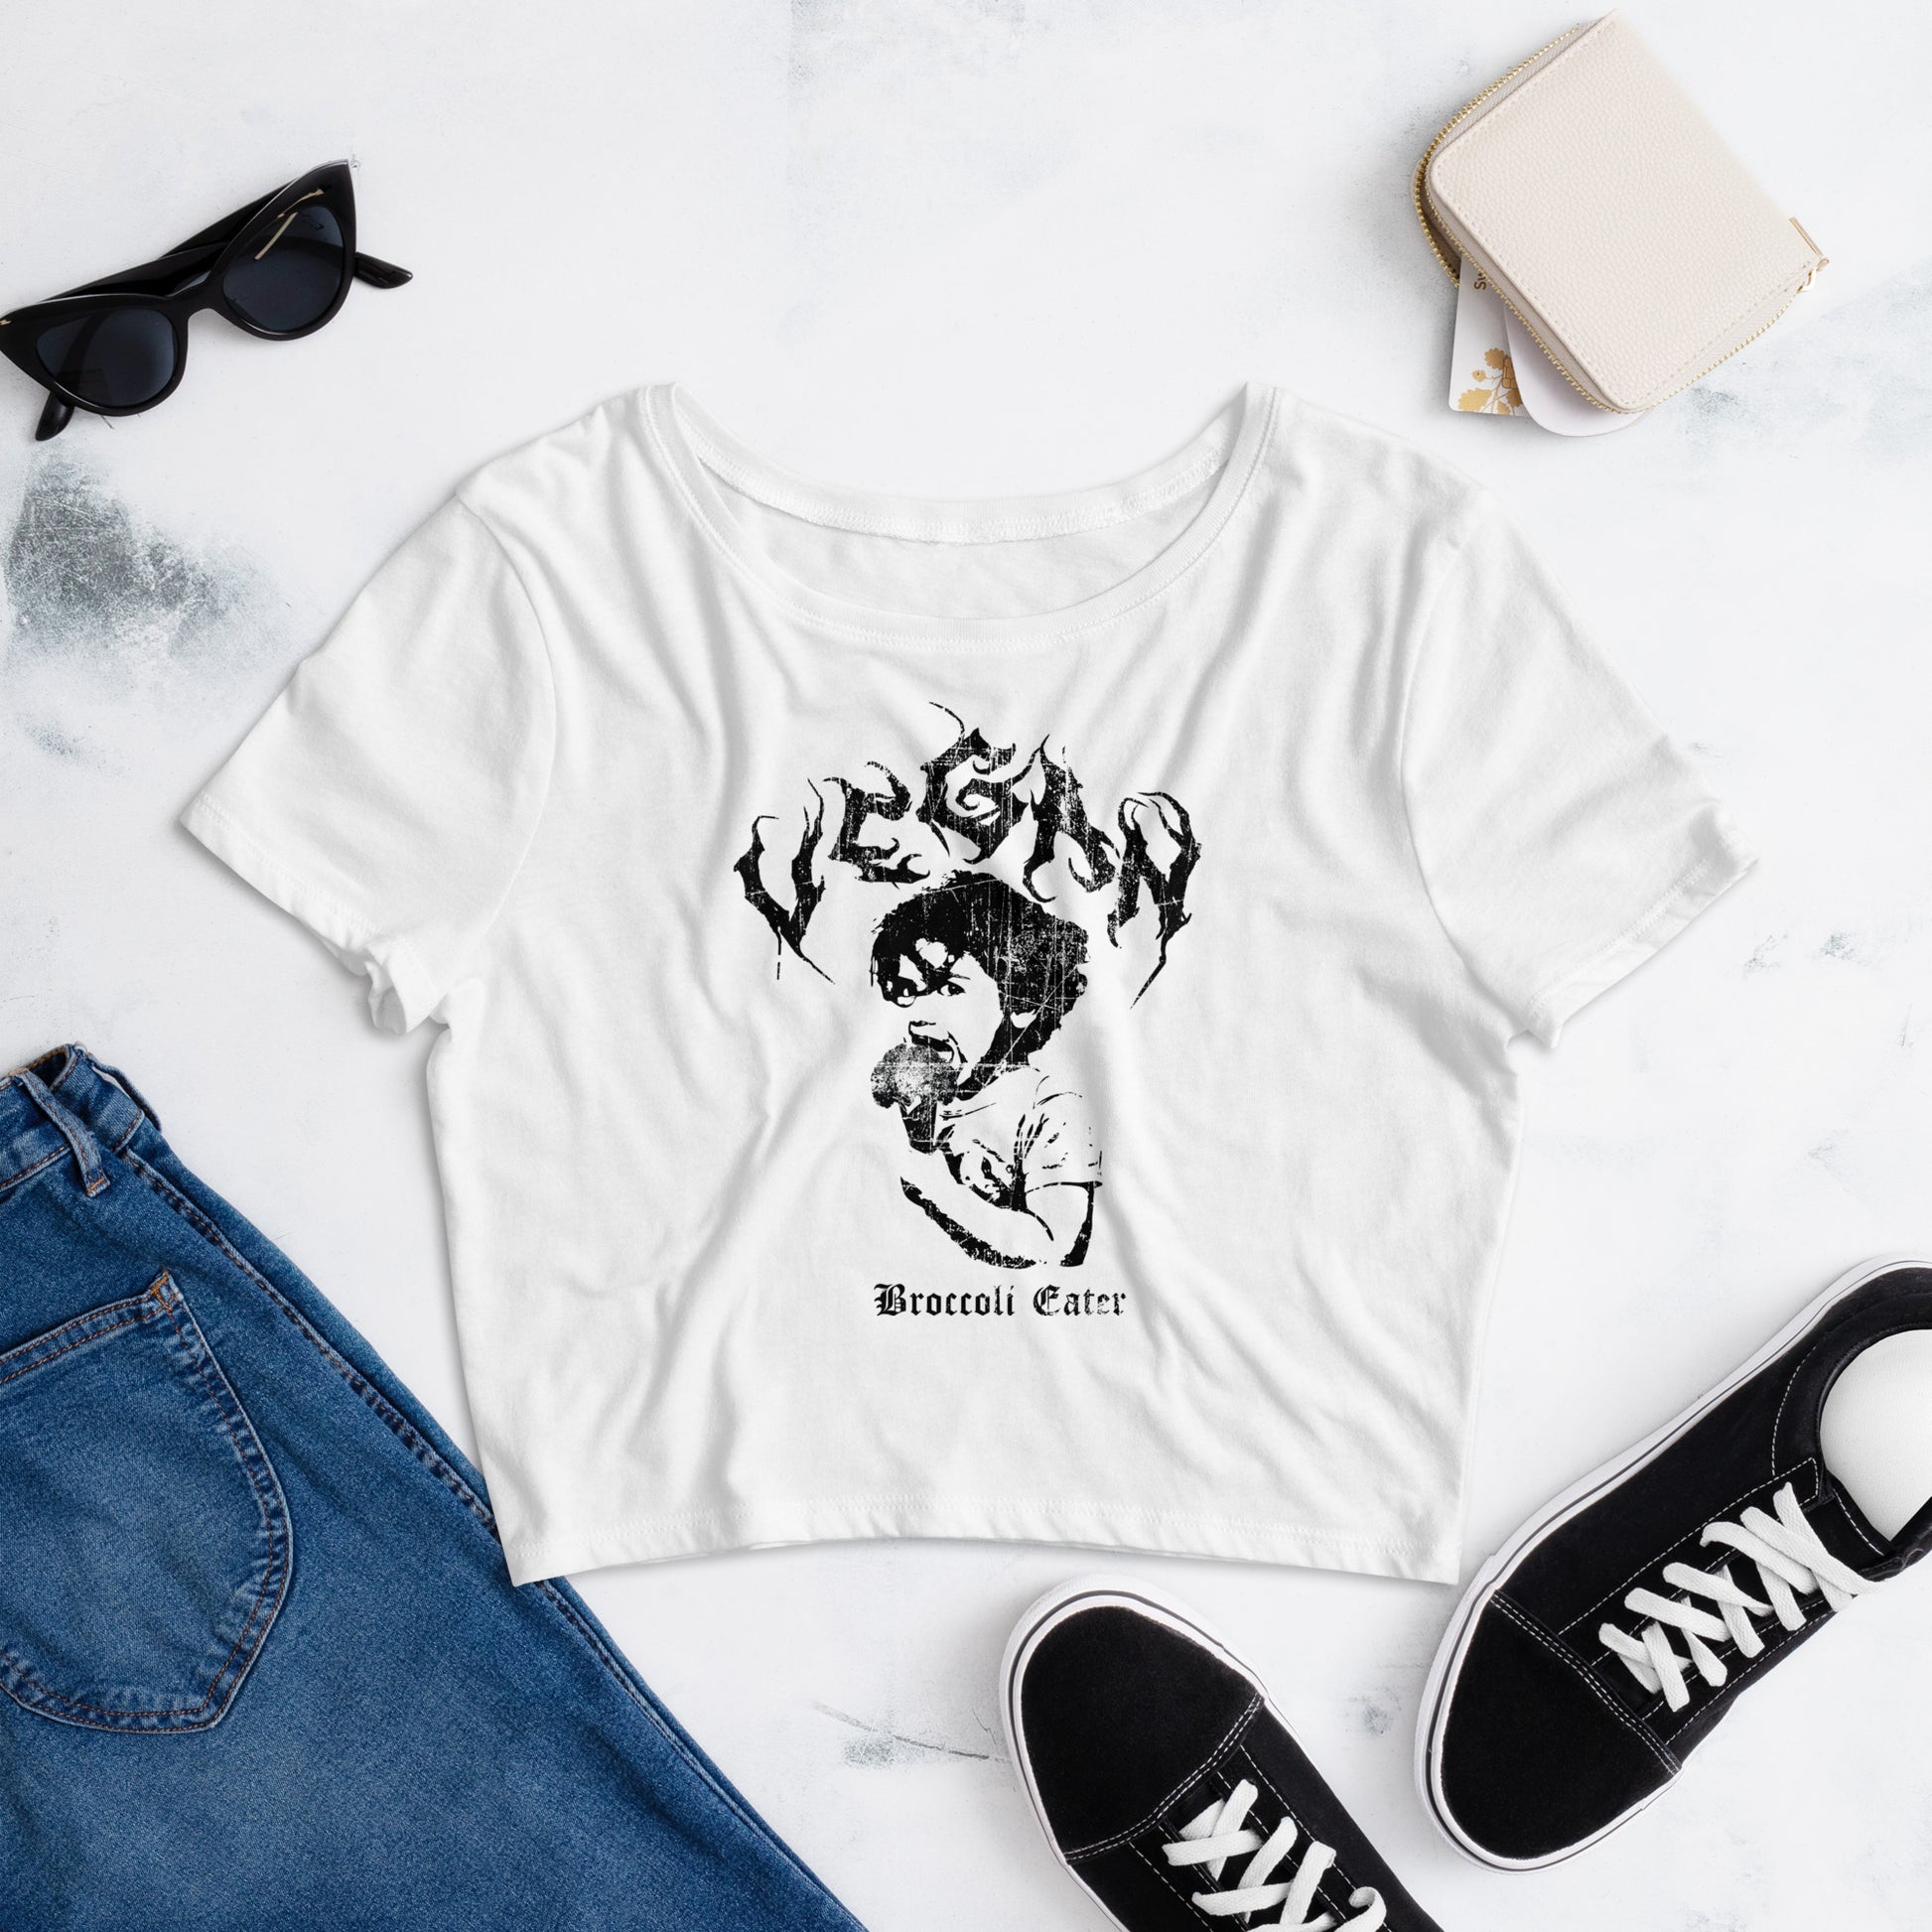 Vegan Inspired Rock fashion Pop culture apparel and t-shirts